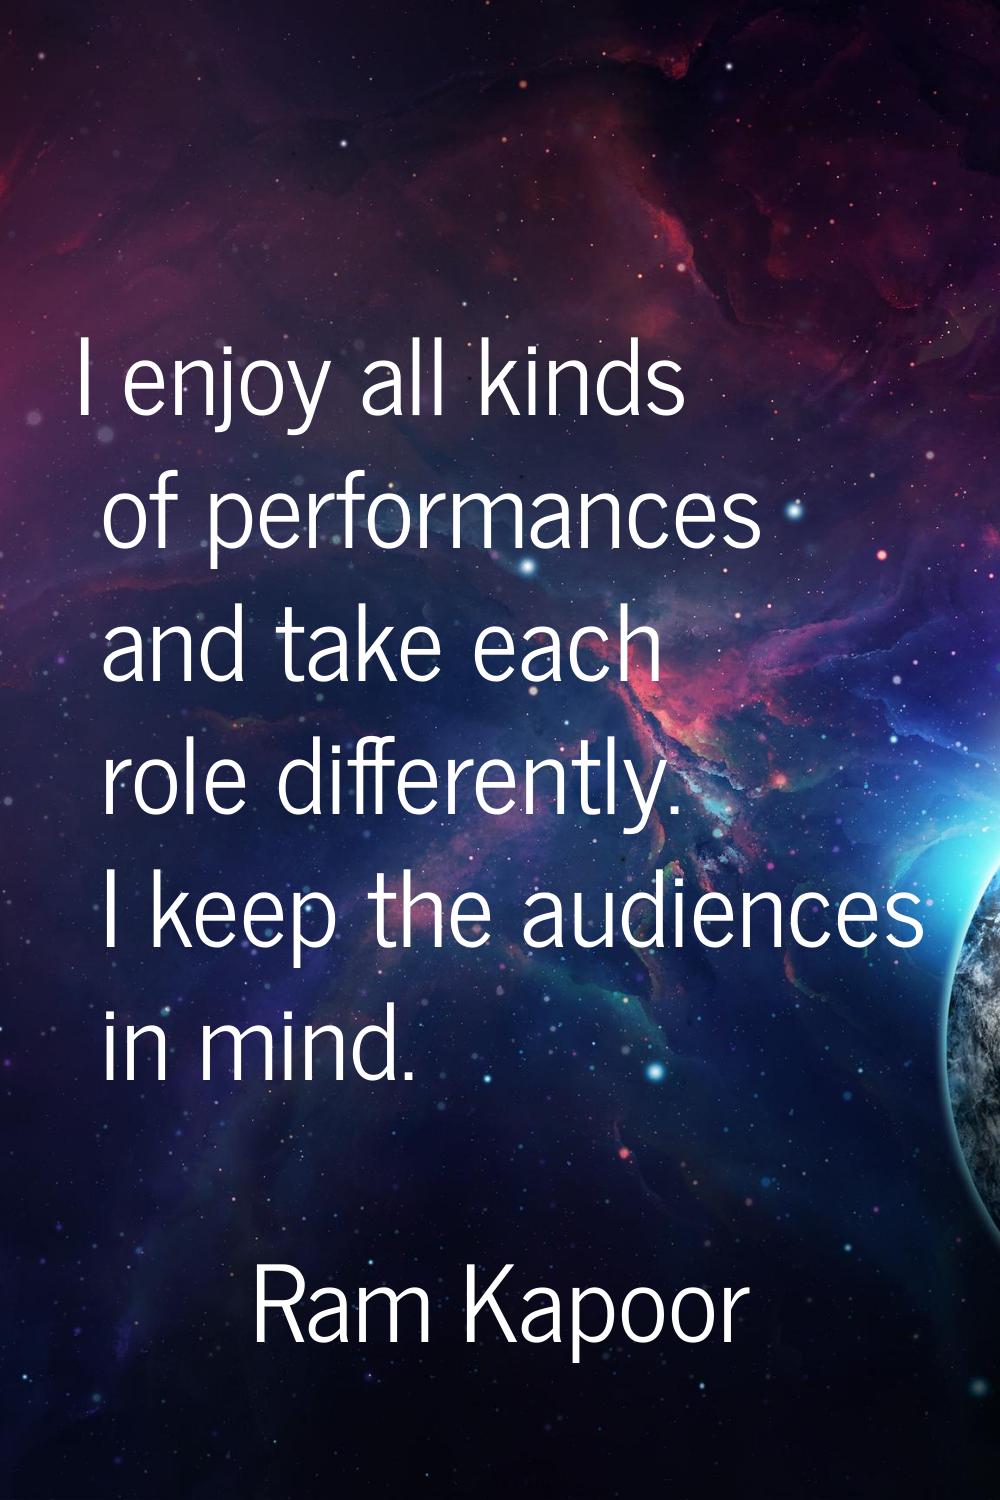 I enjoy all kinds of performances and take each role differently. I keep the audiences in mind.